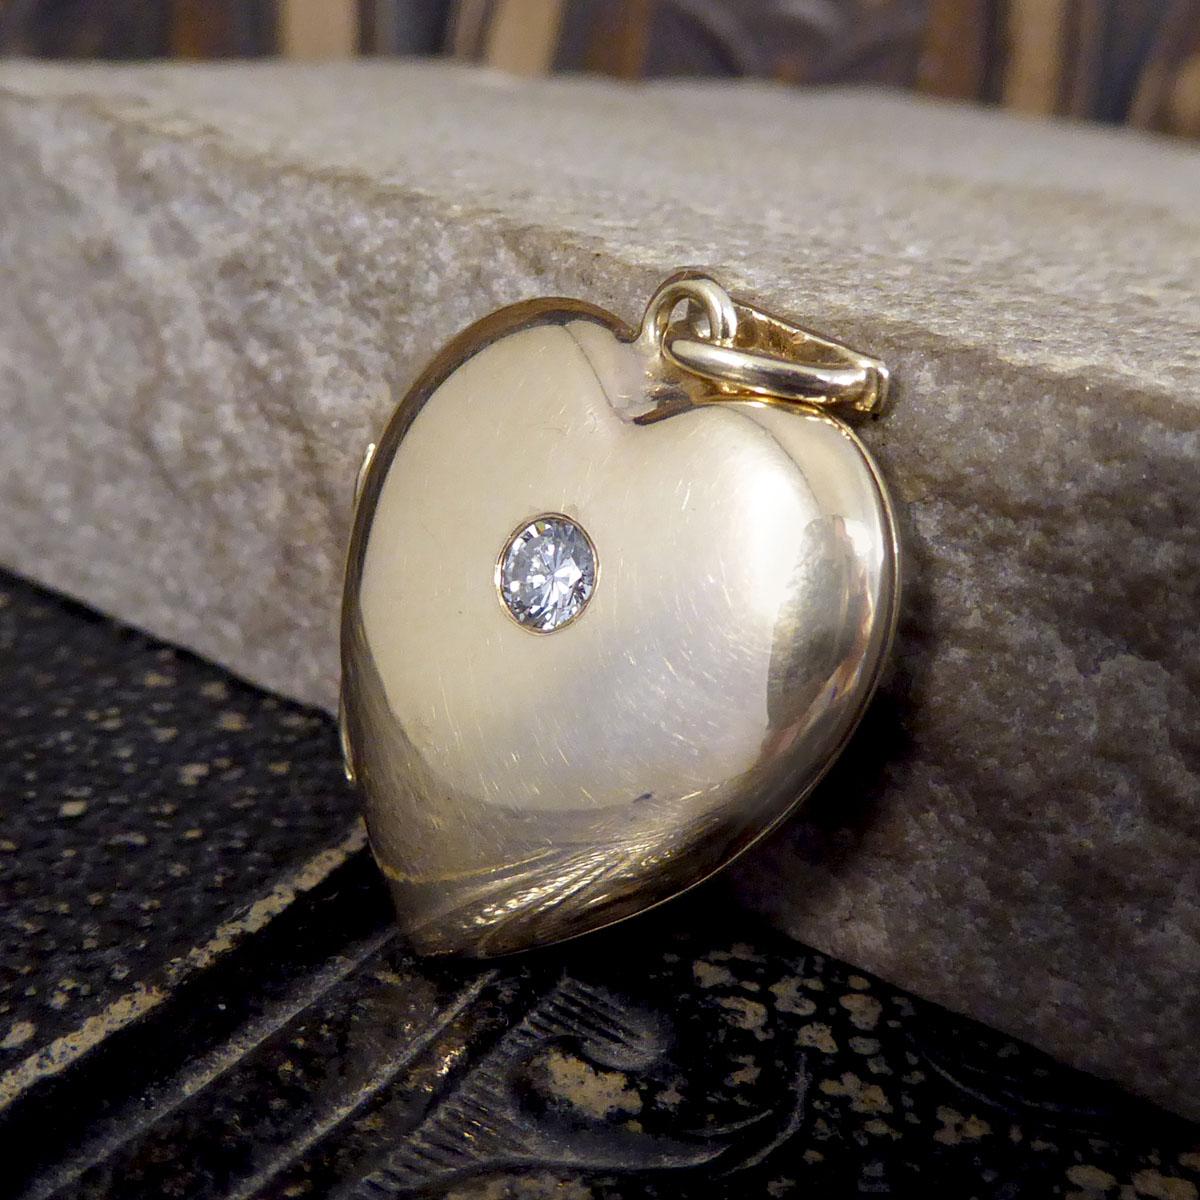 Such a lovely 9ct Yellow Gold Vintage heart locket. This locket is in great condition for its age with full hallmarks on the back showing is was made in Birmingham in 1990. The locket itself has a snap closing but does sit slightly ajar after is has